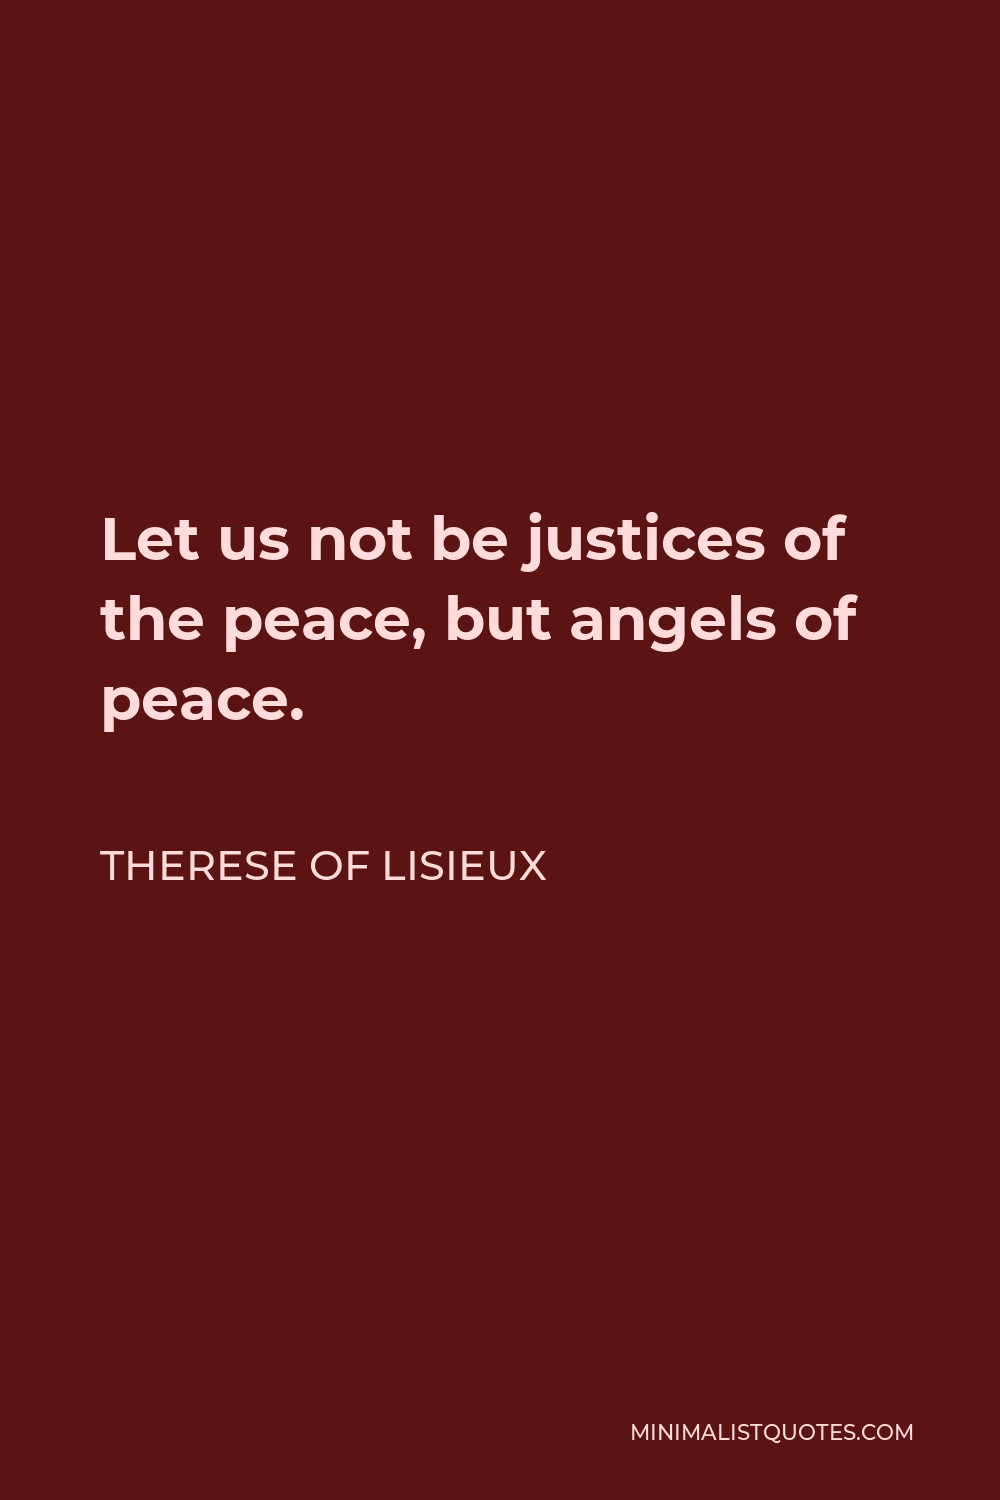 Therese of Lisieux Quote - Let us not be justices of the peace, but angels of peace.